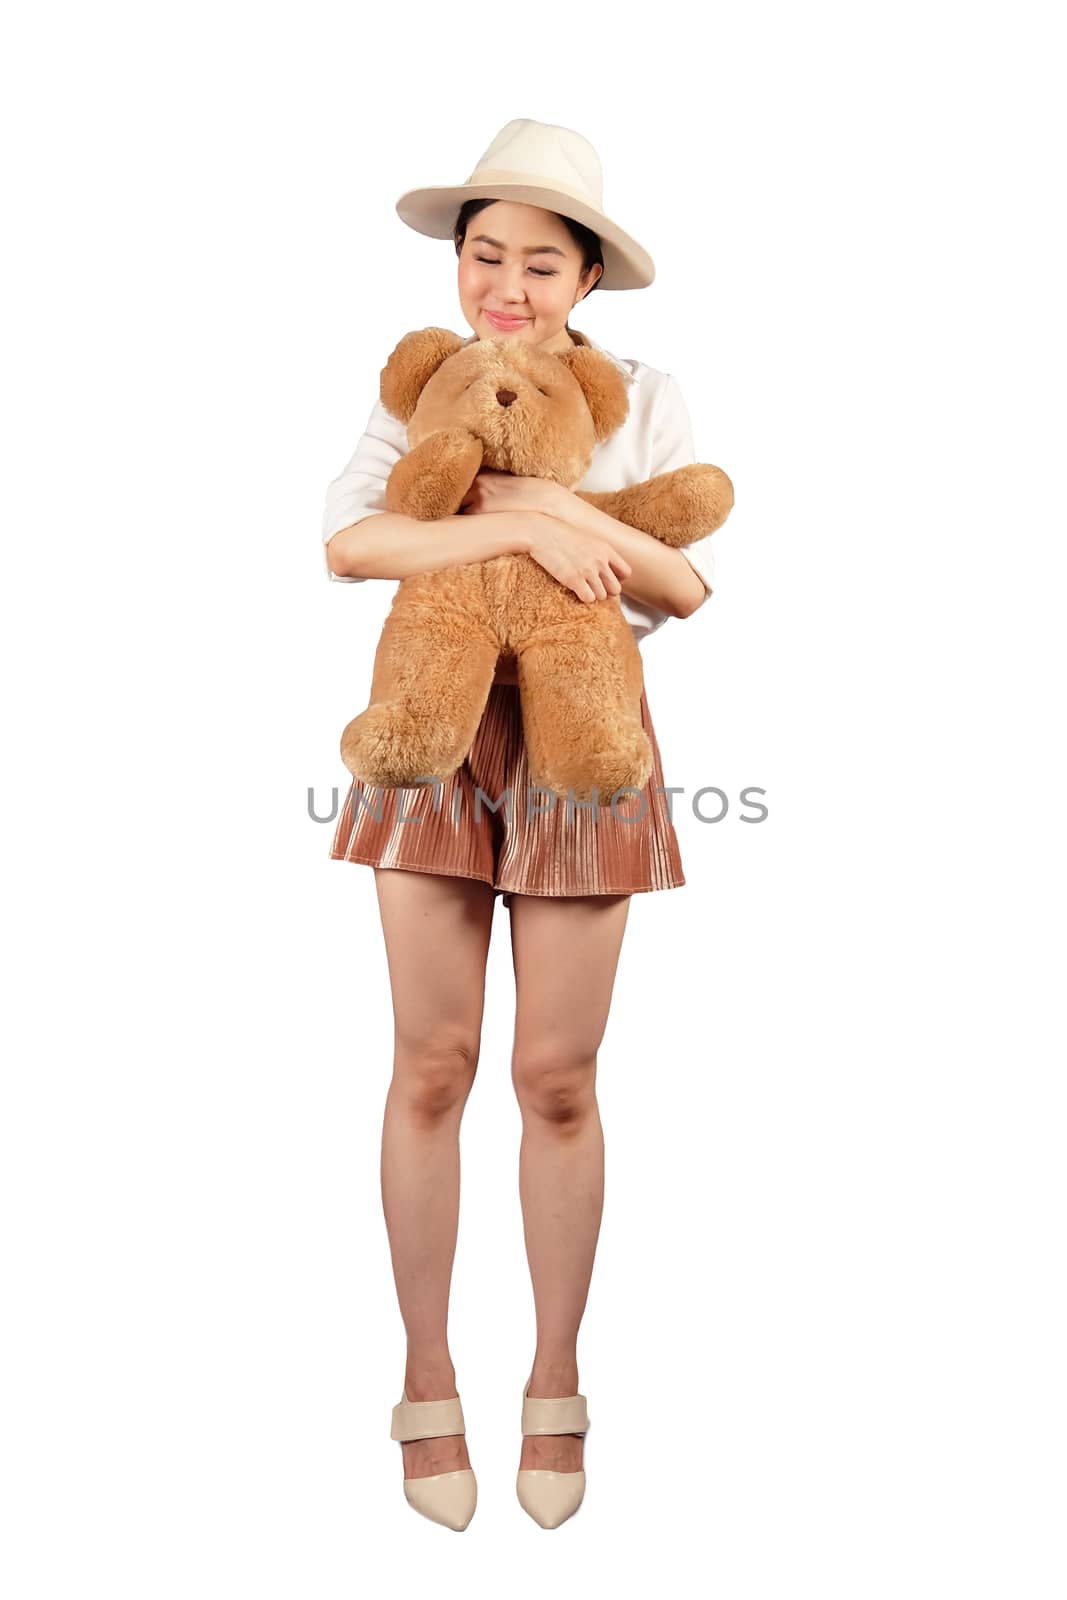 Lovely smiling young woman with hat holding big soft teddy bear  by Surasak